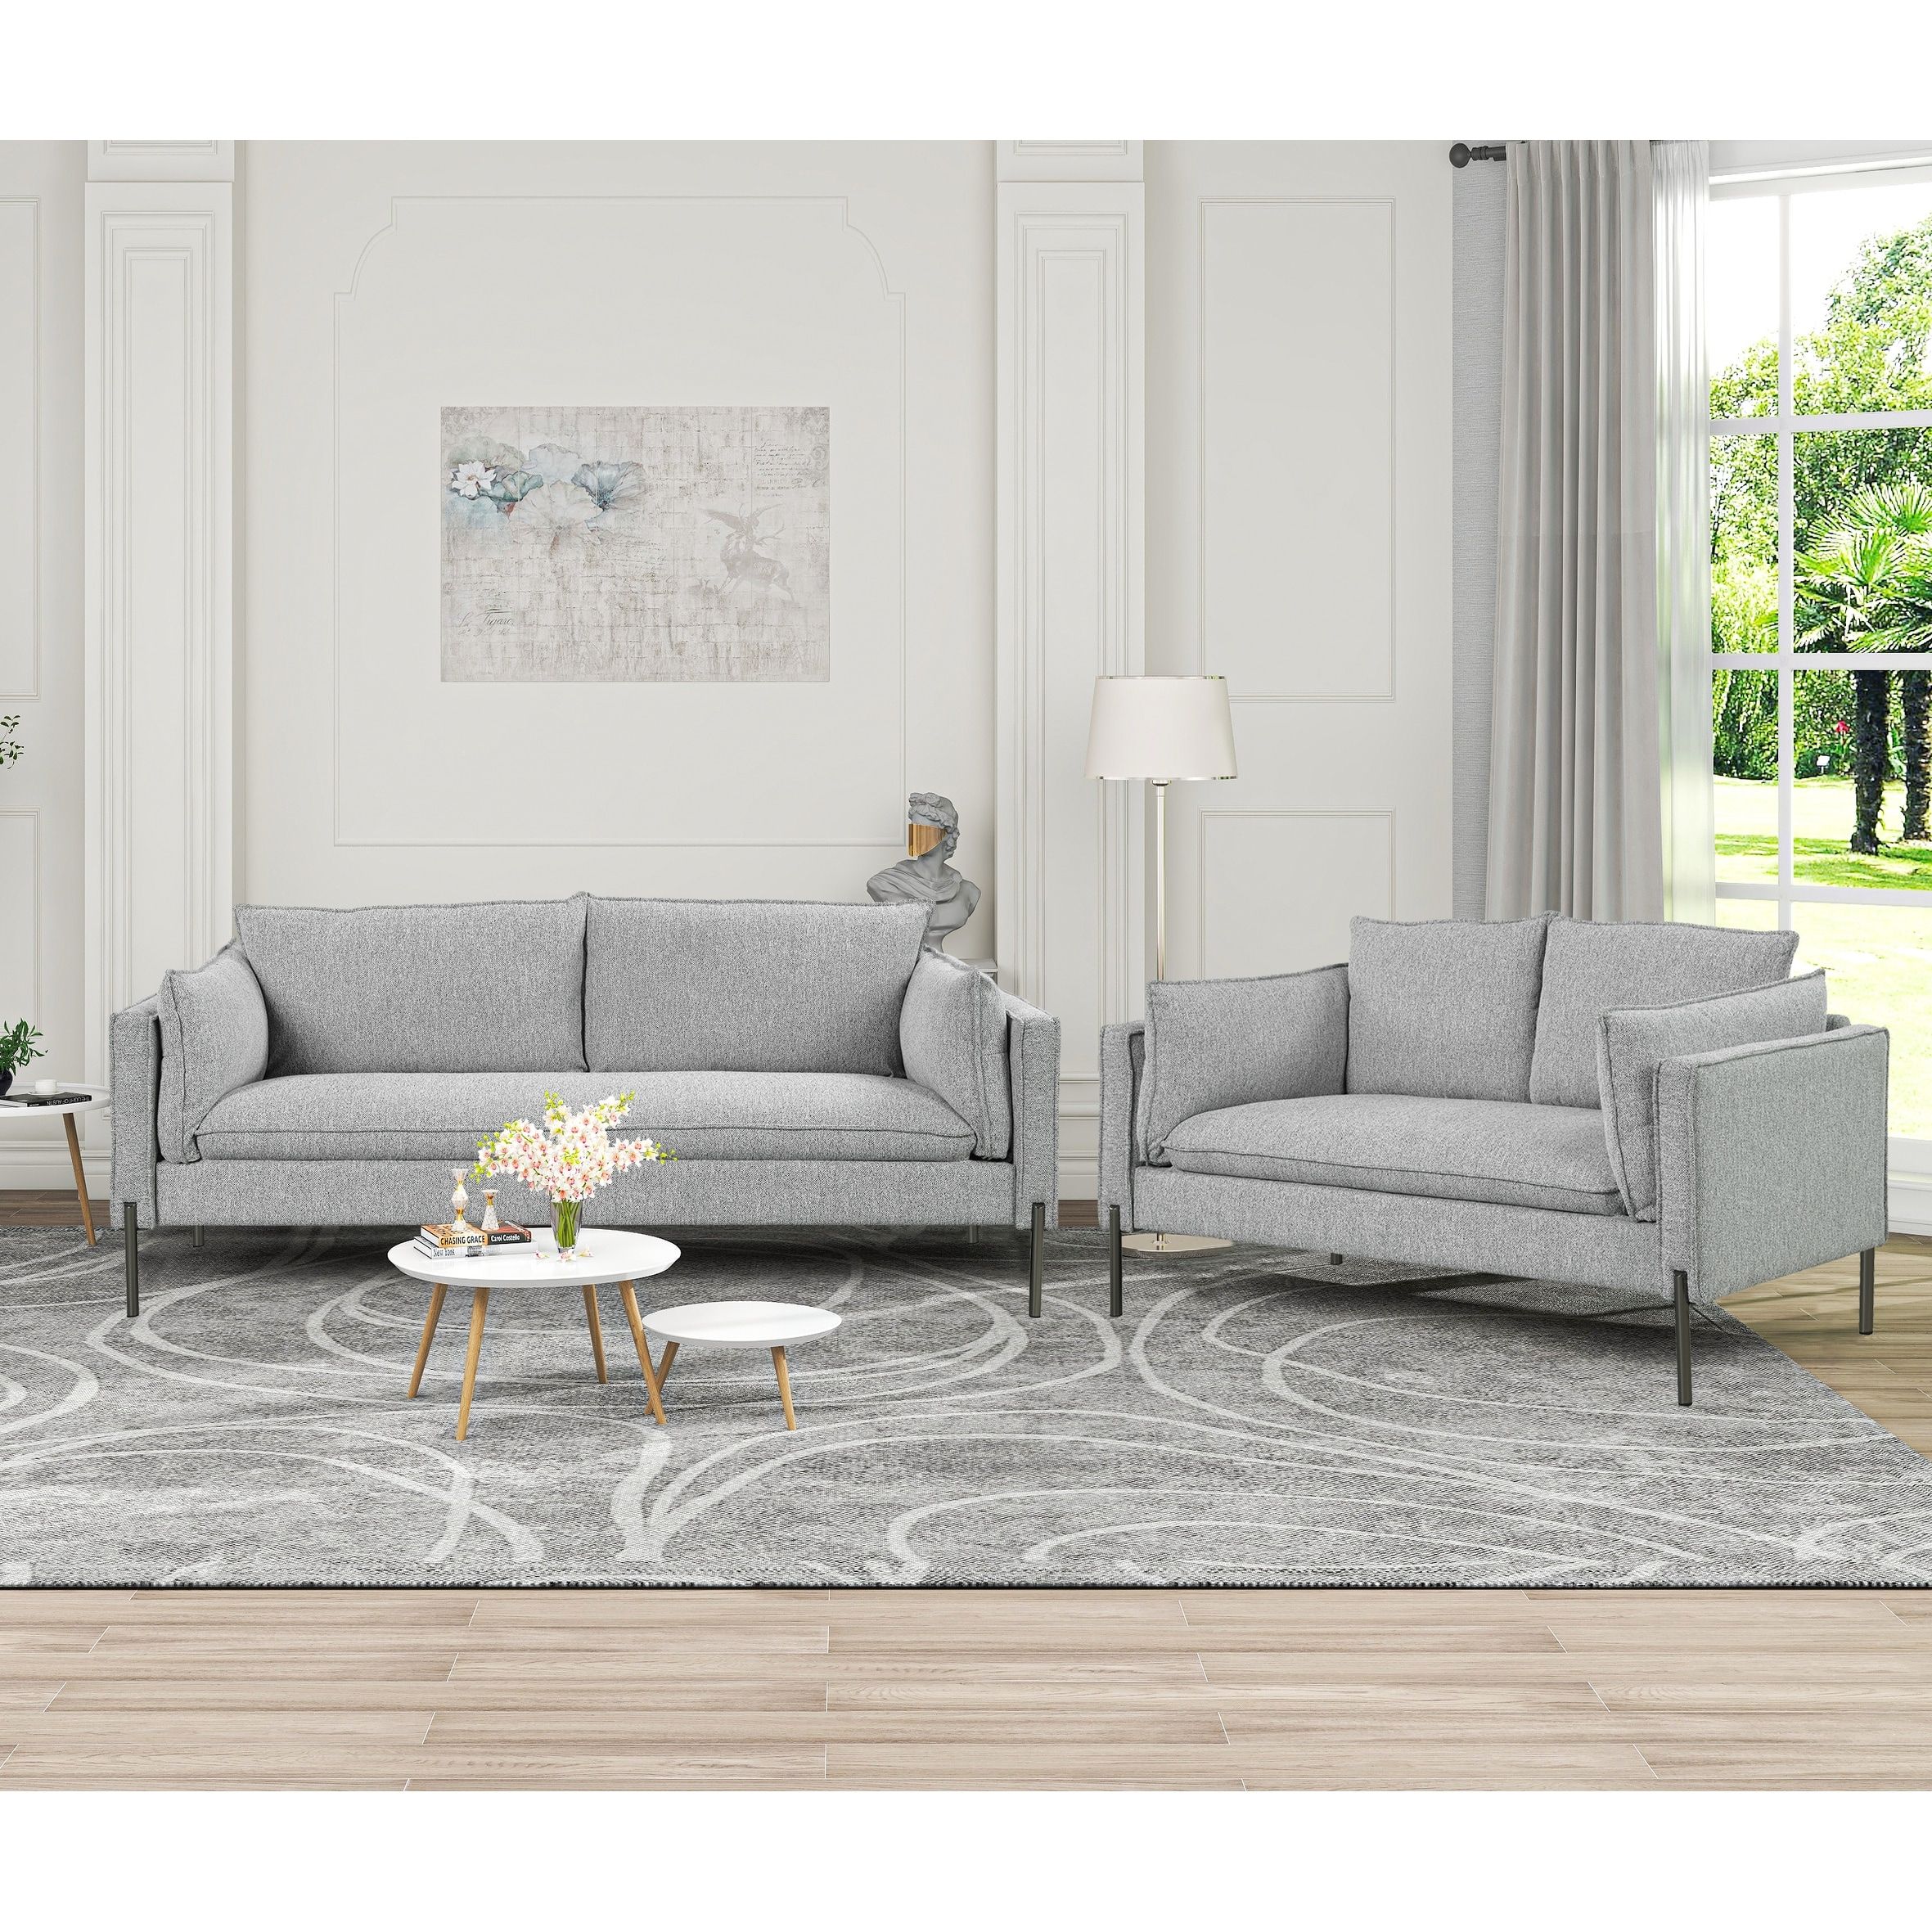 2 Piece Sofa Sets Modern Linen Fabric, Loveseat And 3 Seat Couch Set  Furniture – – 36800312 Regarding Modern Linen Fabric Sofa Sets (Gallery 1 of 20)